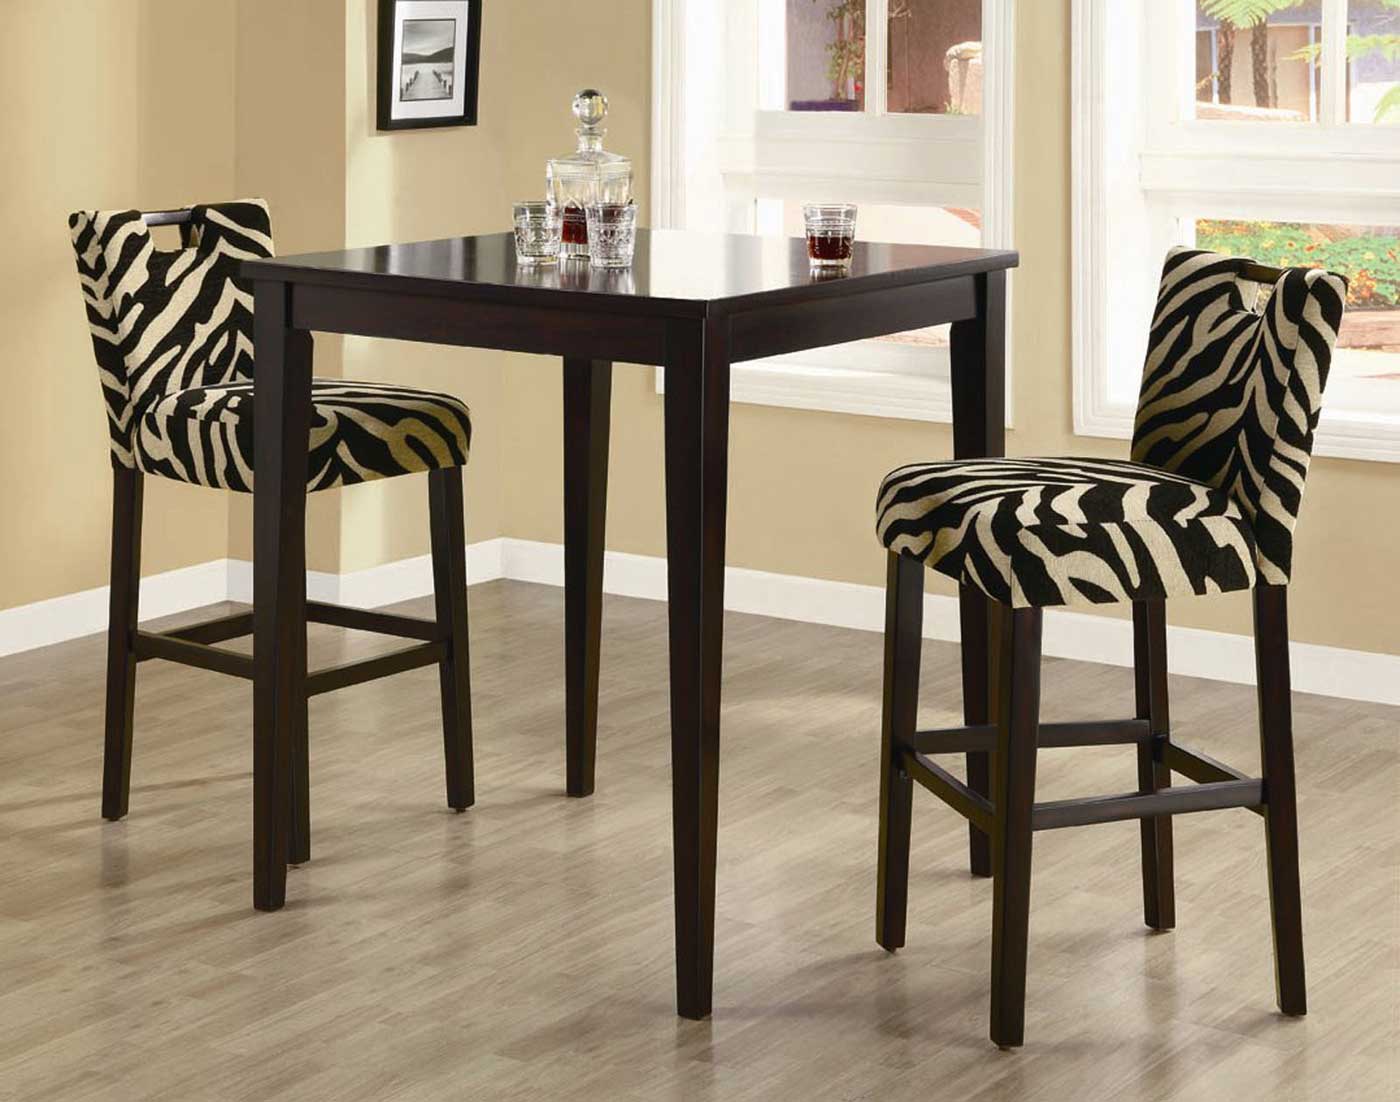 On The Room Easy On The Eye Dining Room Ideas With Zebra Chairs For Villa Design And Interesting Black Solid Wood Square Dining Room Table Sets Idea Also Light Rustic Wood Flooring Design Dining Room The Best Simple Dining Room Ideas